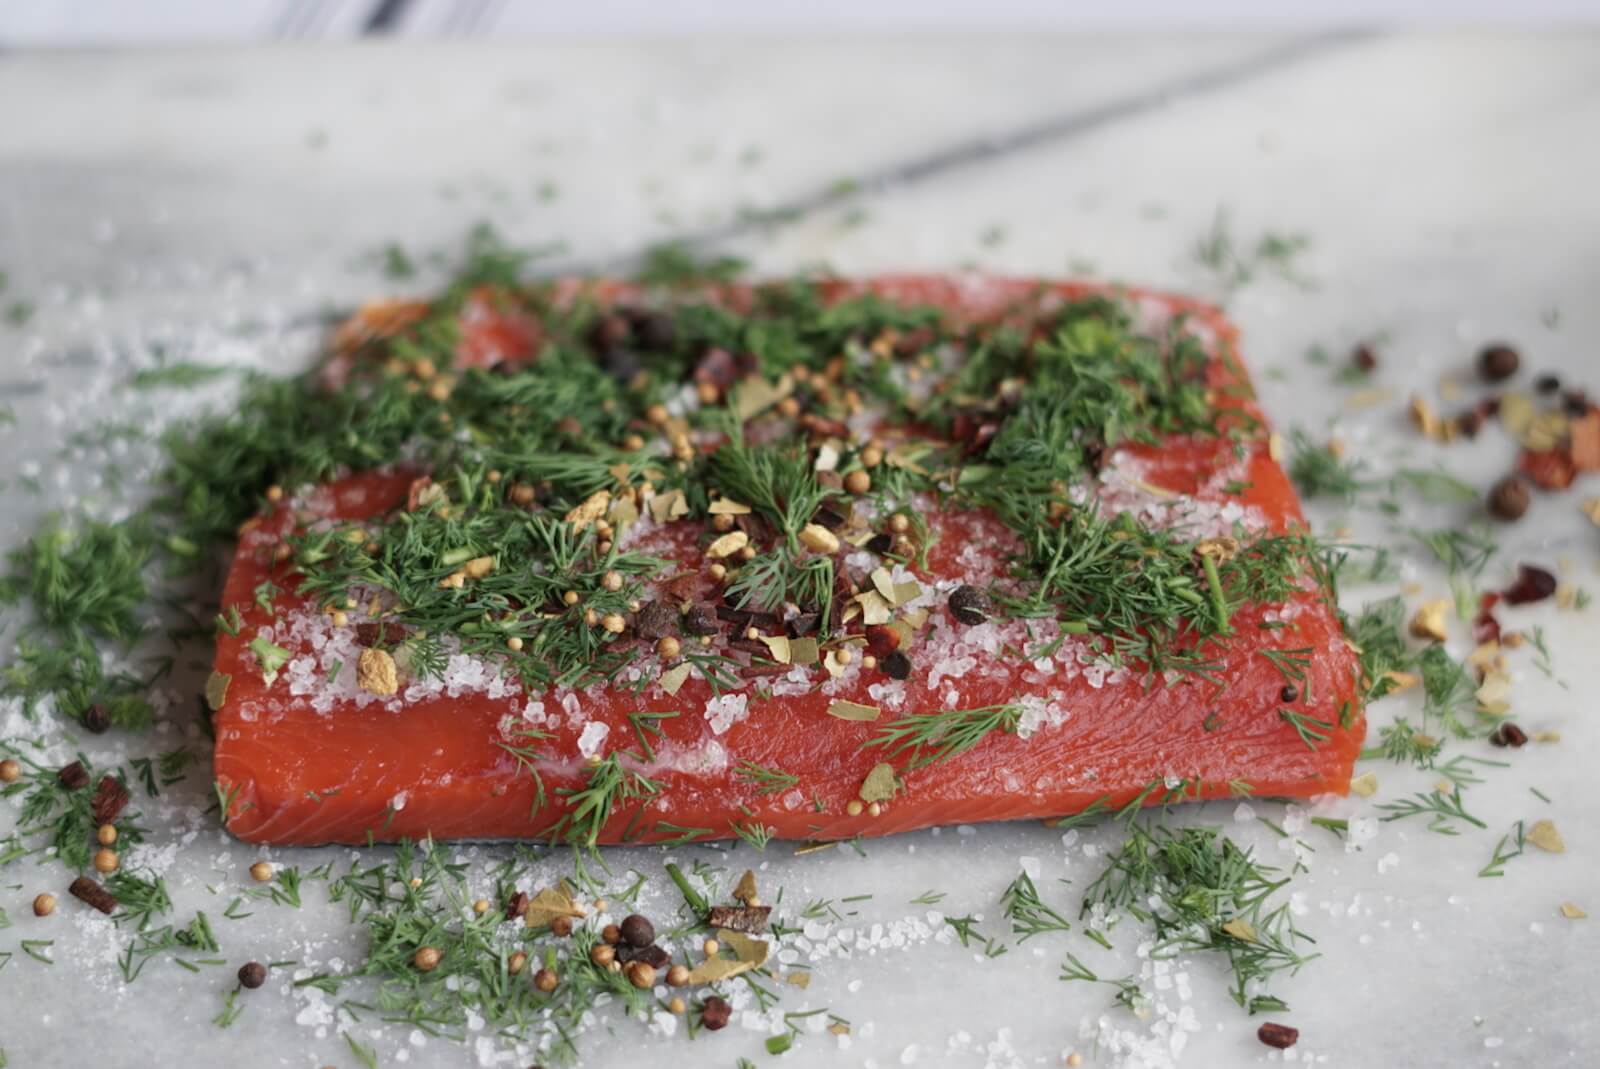 Gravlax is also called gravlaks, graflax, graavilohi, or gravad laks in the Nordic countries